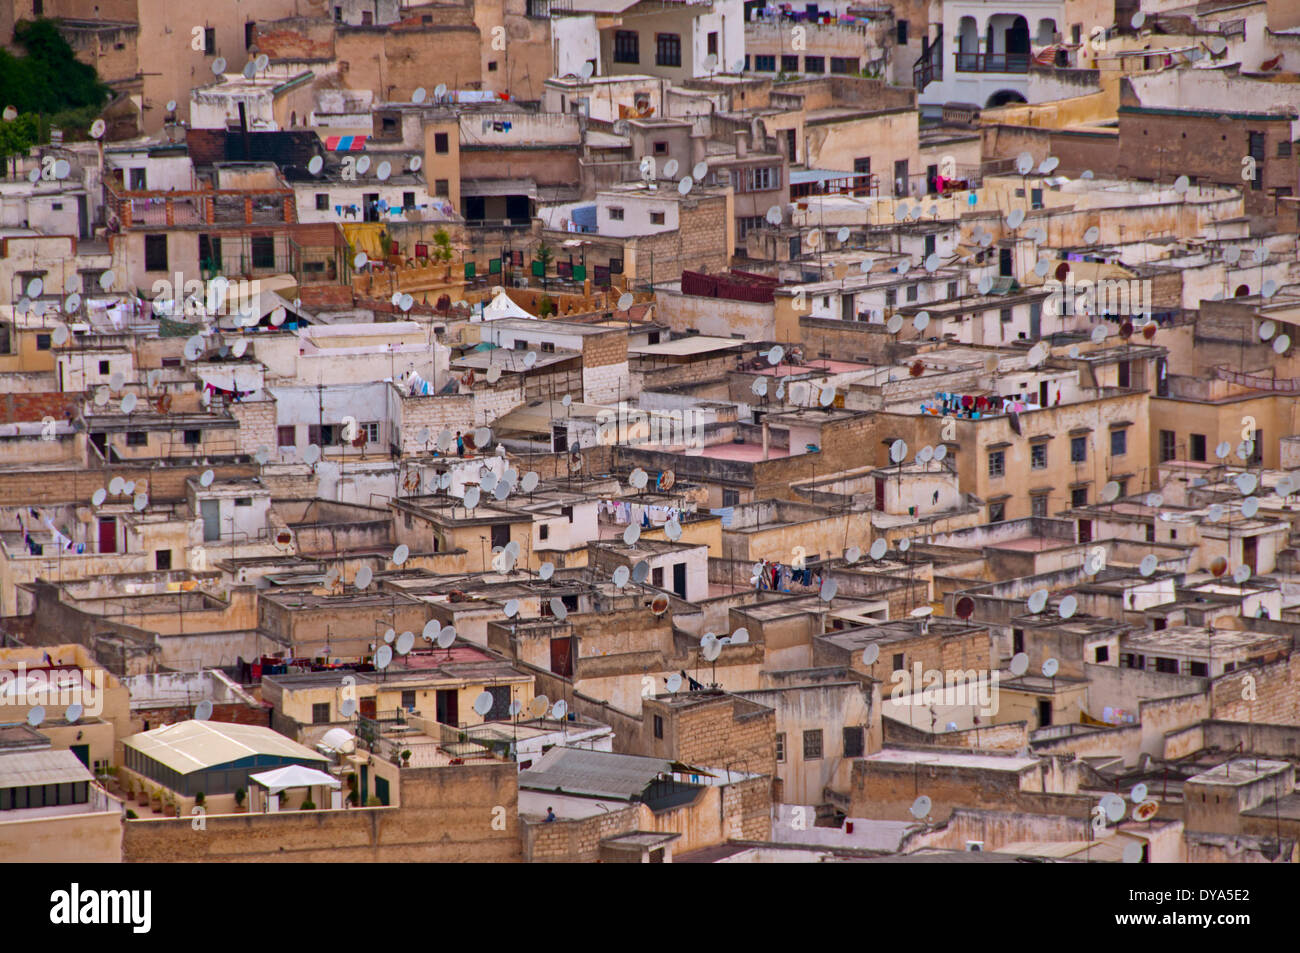 Africa, North Africa, Old Town, fez, houses, homes, Morocco, Medina, satellite dishes, dish aerial, roofs, Stock Photo